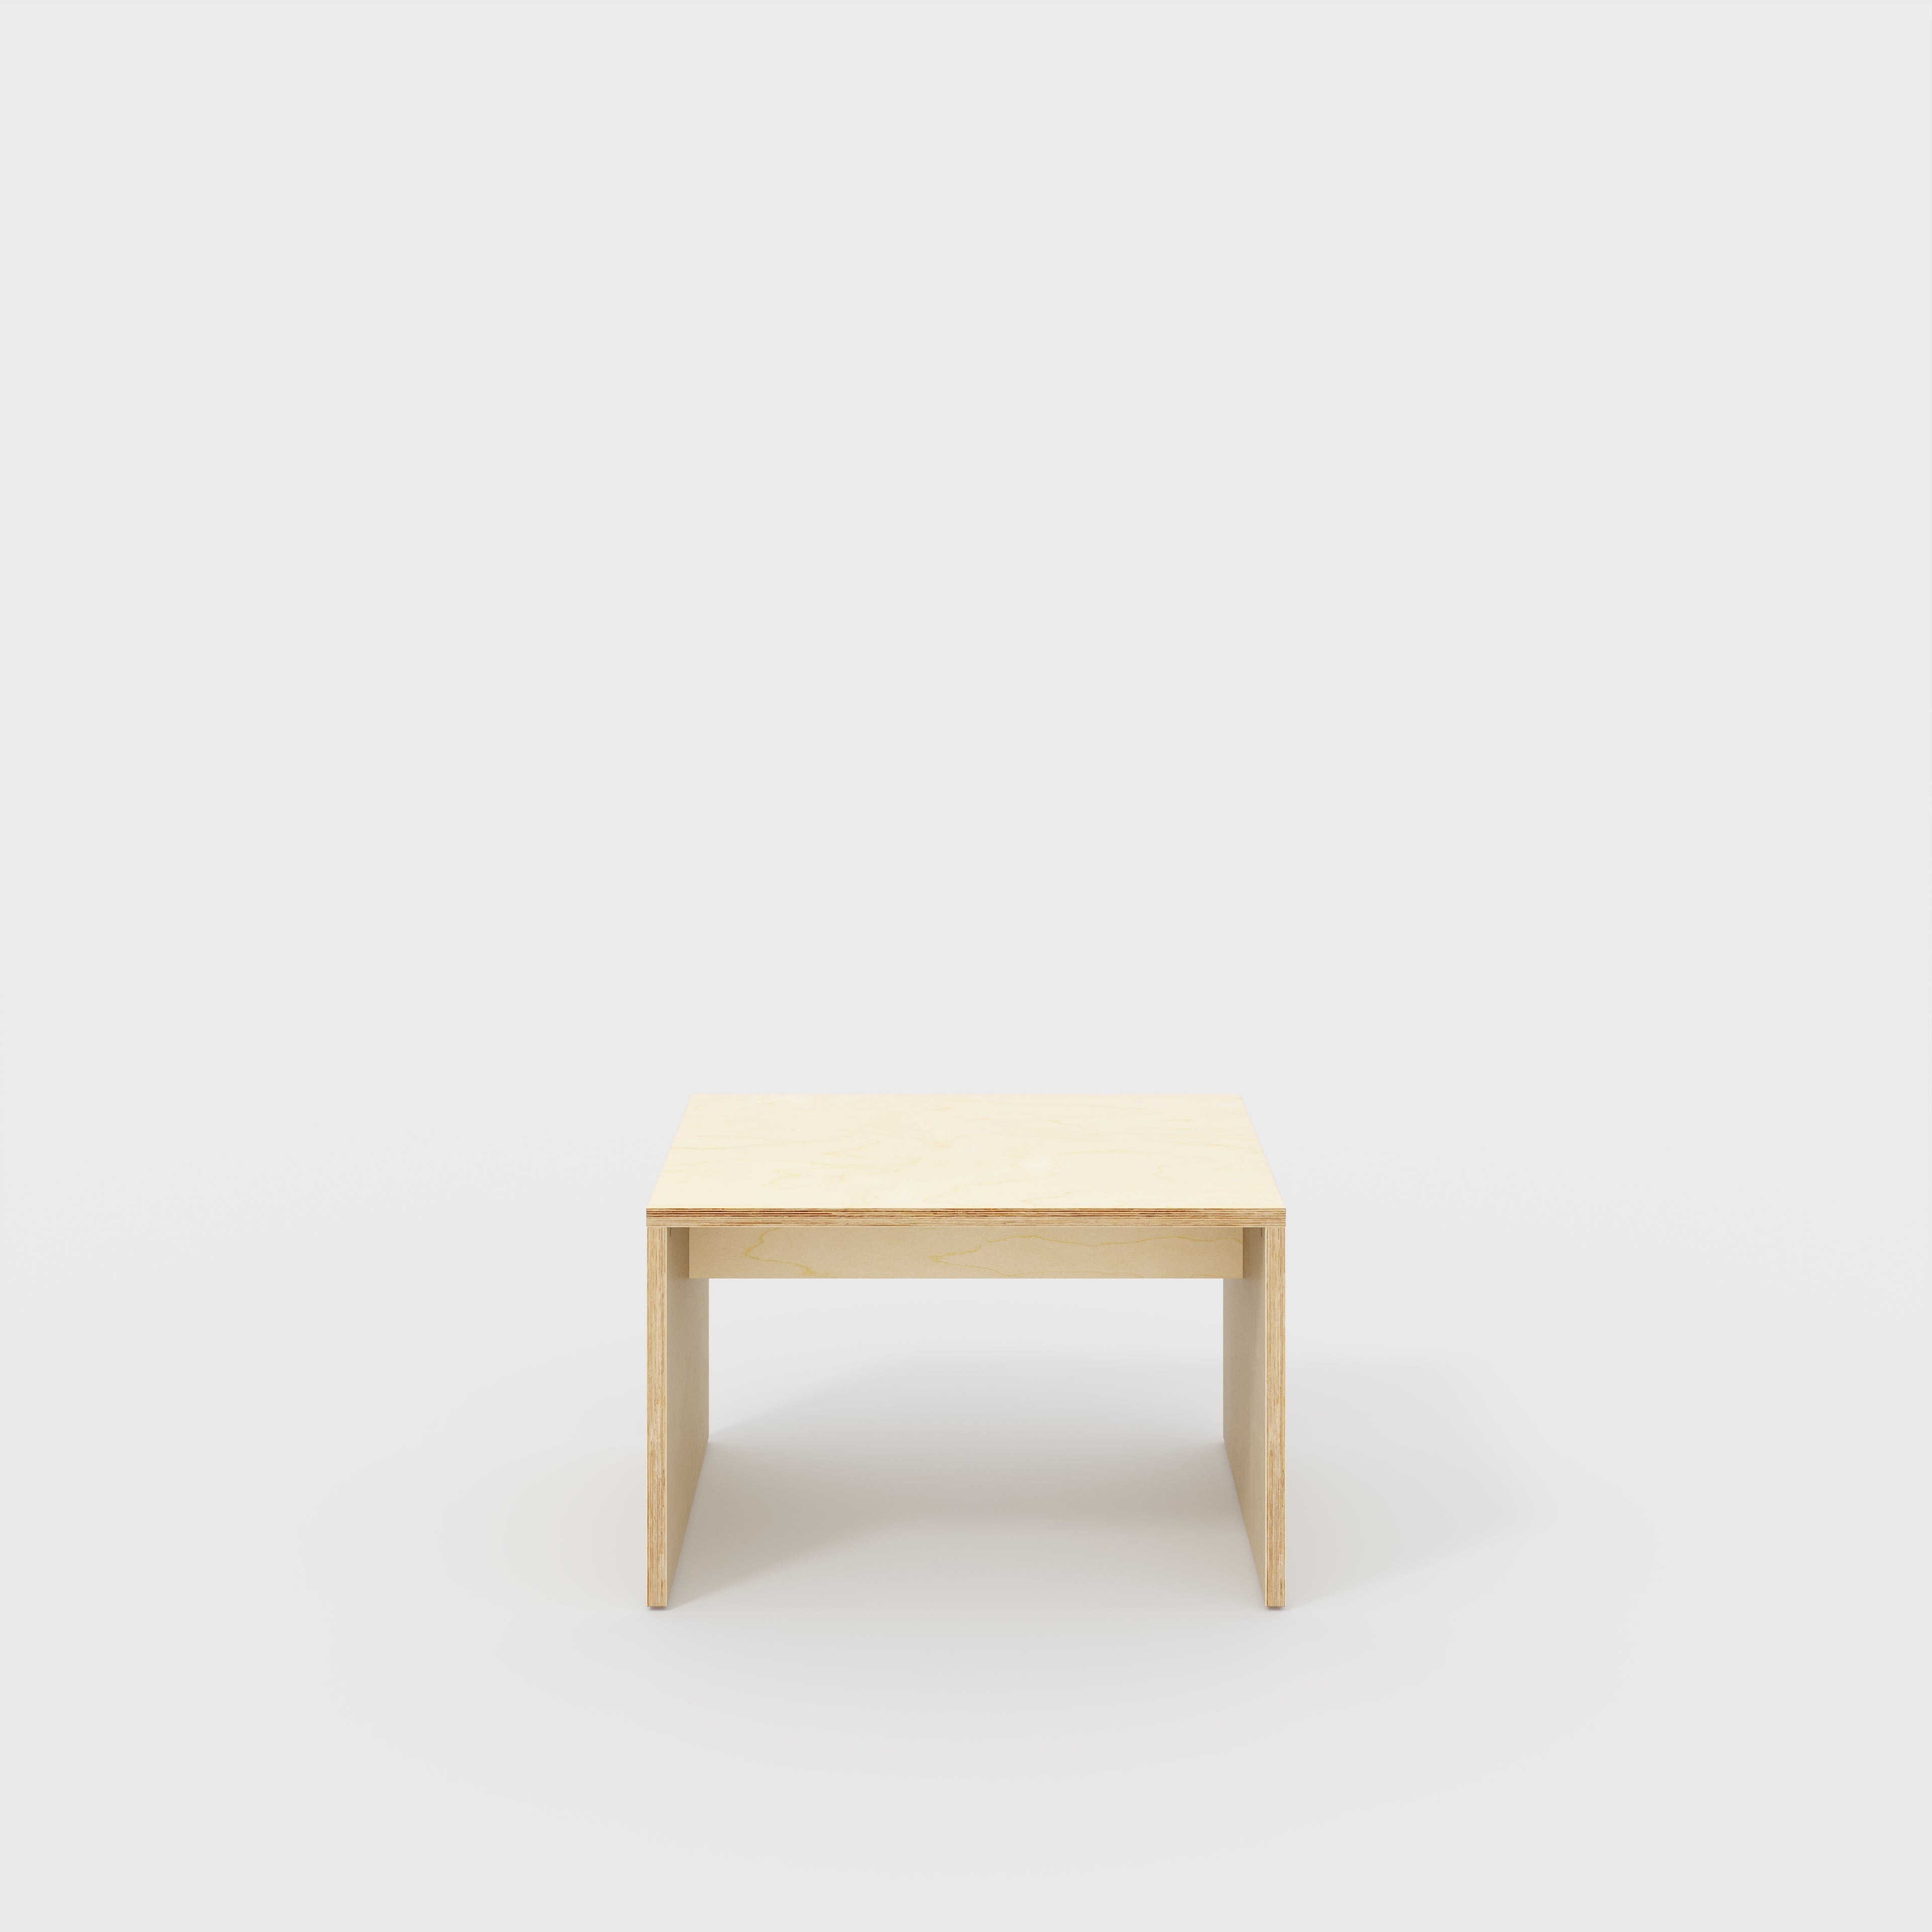 Kids Table with Solid Sides - Plywood Birch - 800(w) x 600(d) x 500(h)